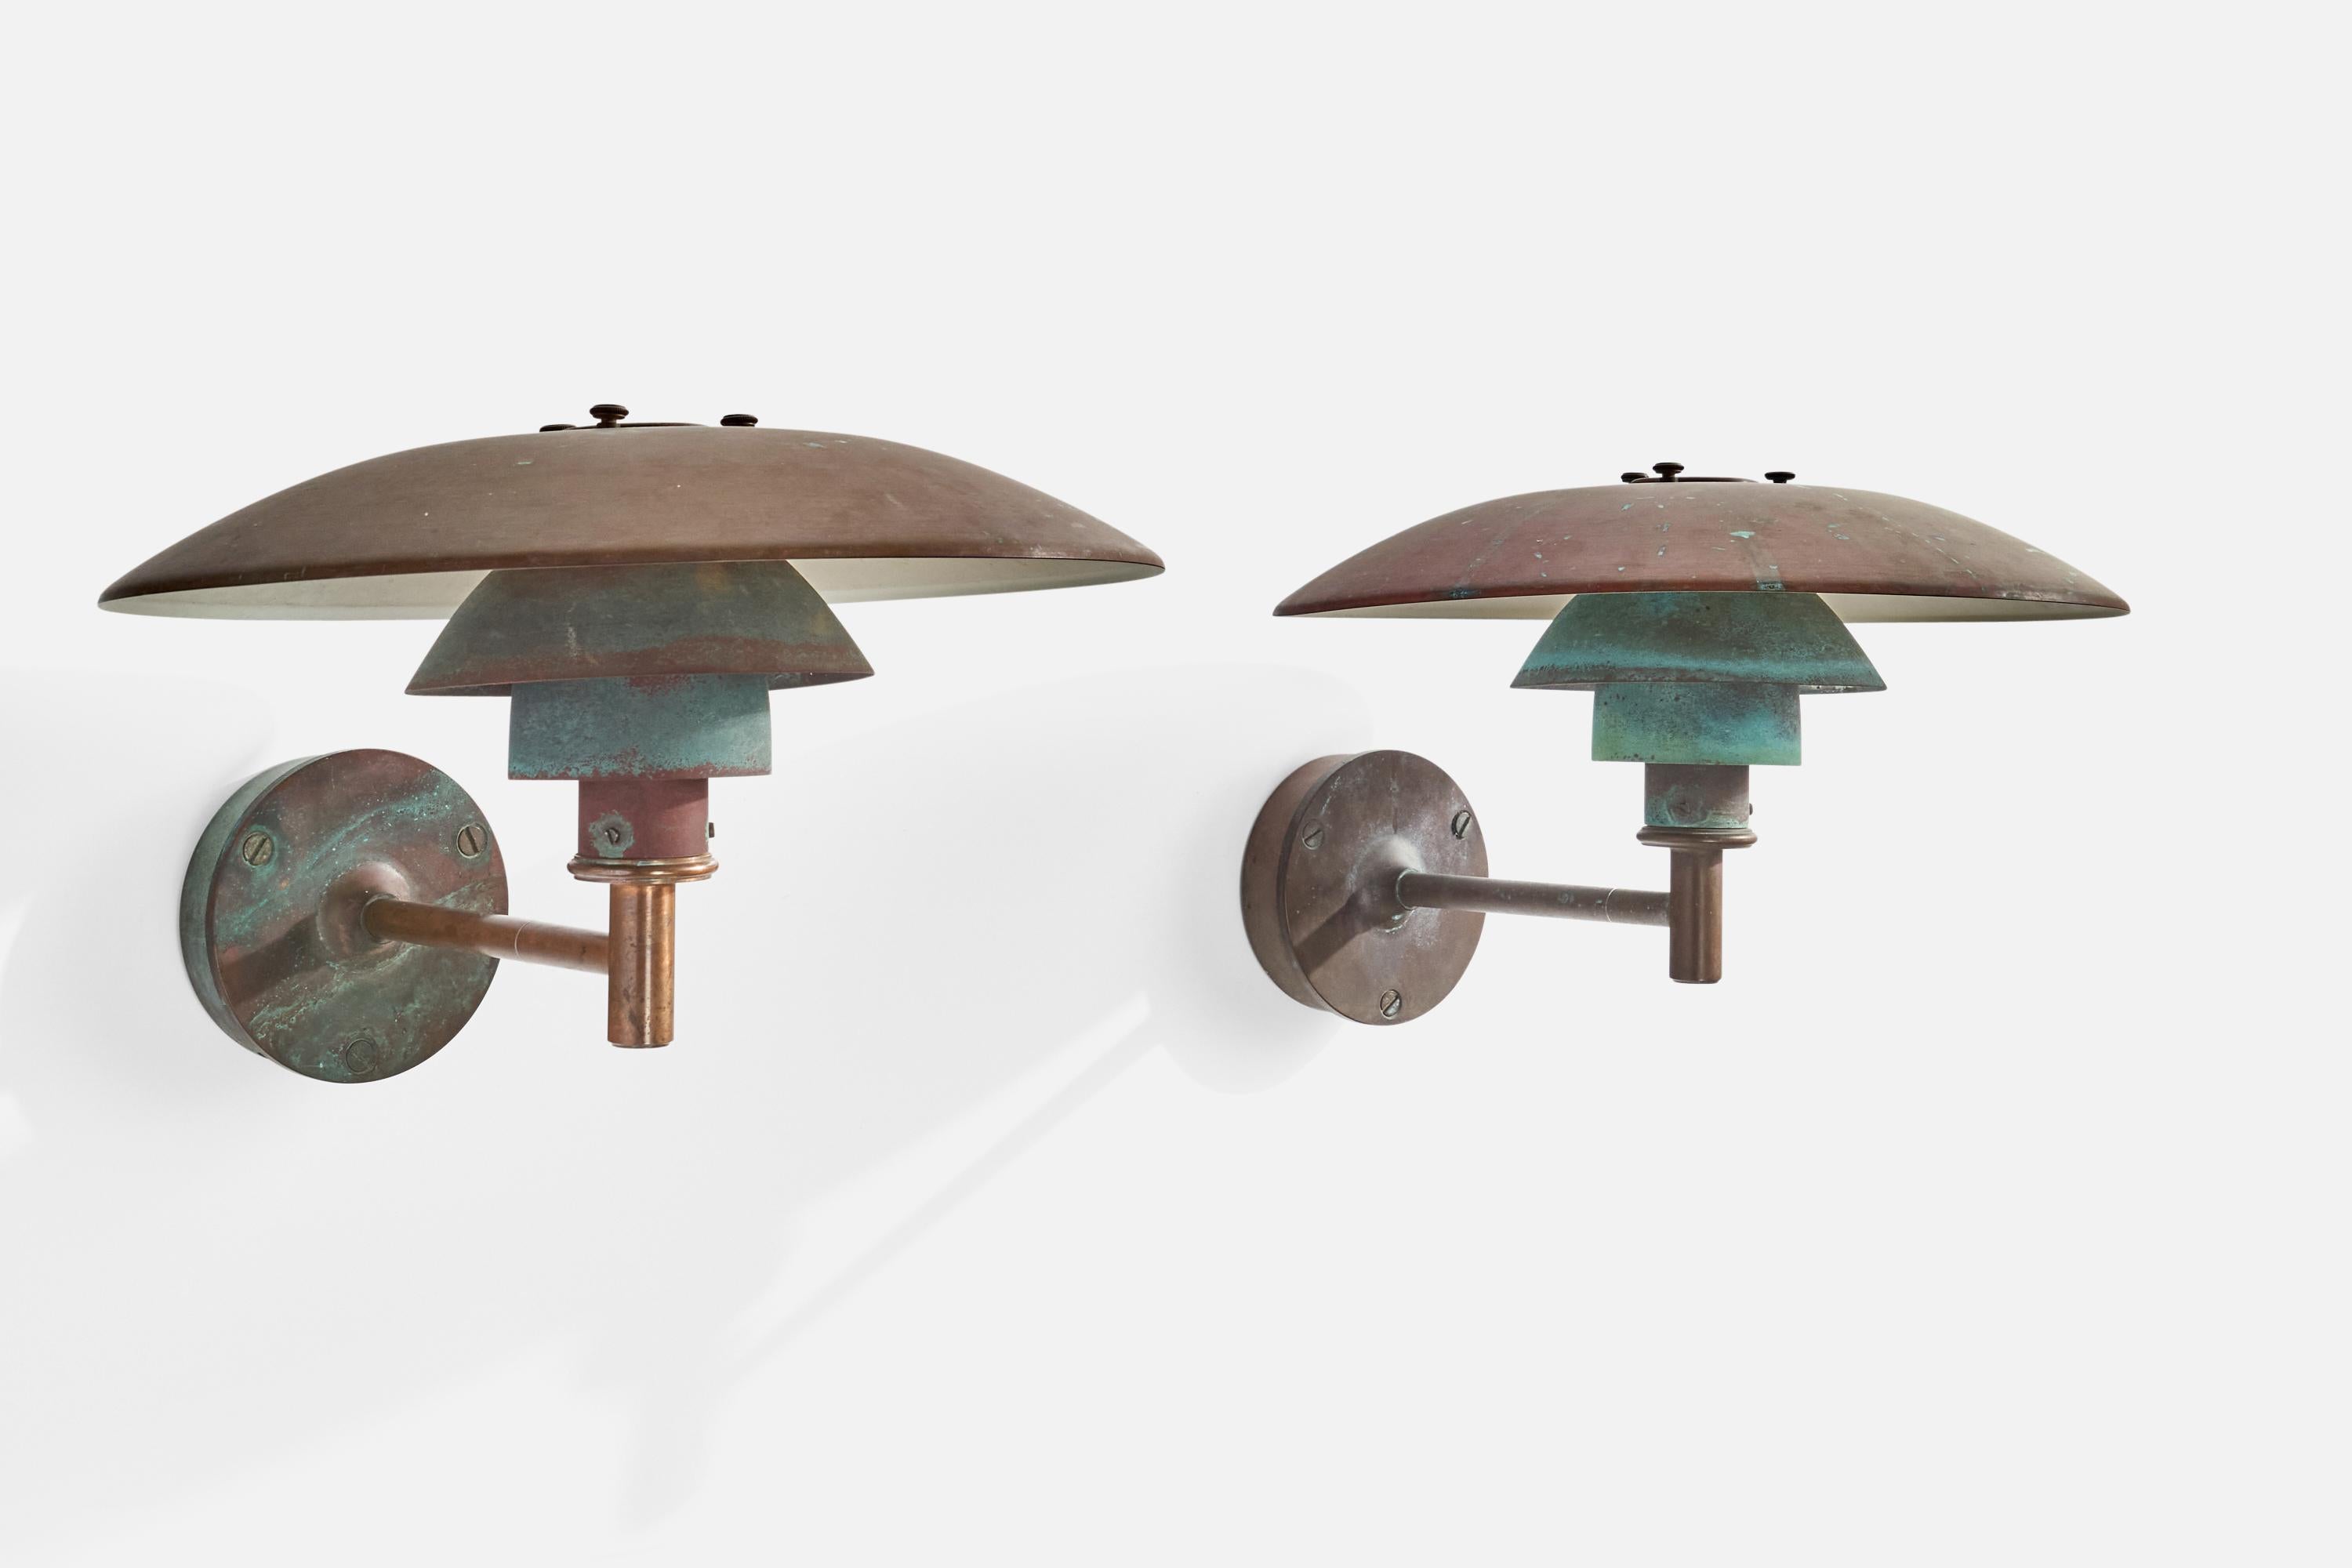 A pair of patinated copper wall lights designed by Poul Henningsen and produced by Louis Poulsen, Denmark, c. 1950s.

Overall Dimensions (inches): 10.5” H x 18” W x 20”  D
Back Plate Dimensions (inches): 5.75” H x 5.75” W x 1.75”  D
Bulb